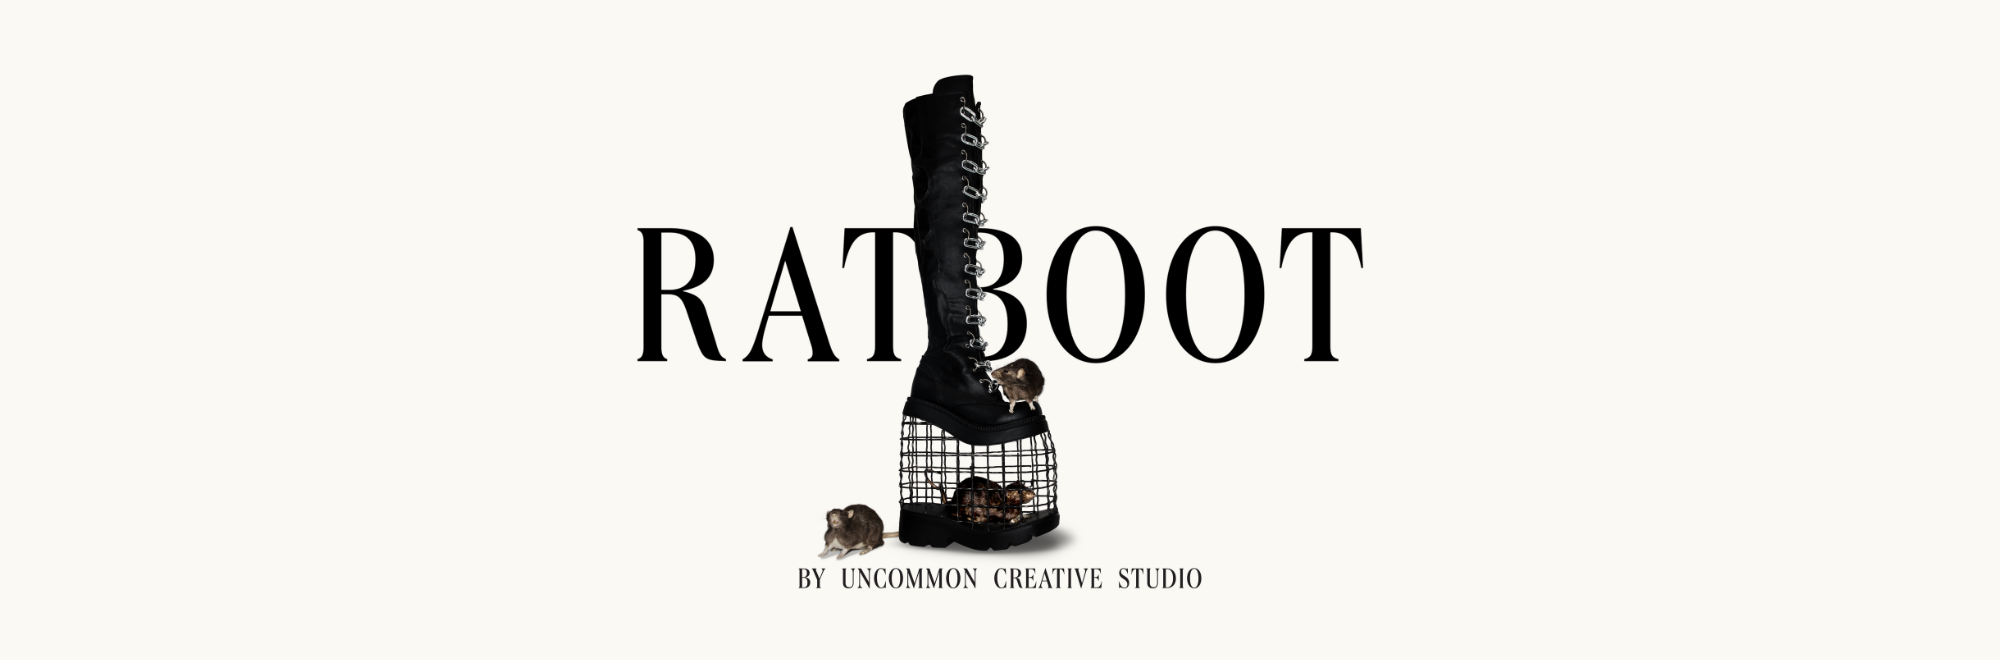 Uncommon creates black leather platform boot to house taxidermied rats for New York Fashion Week